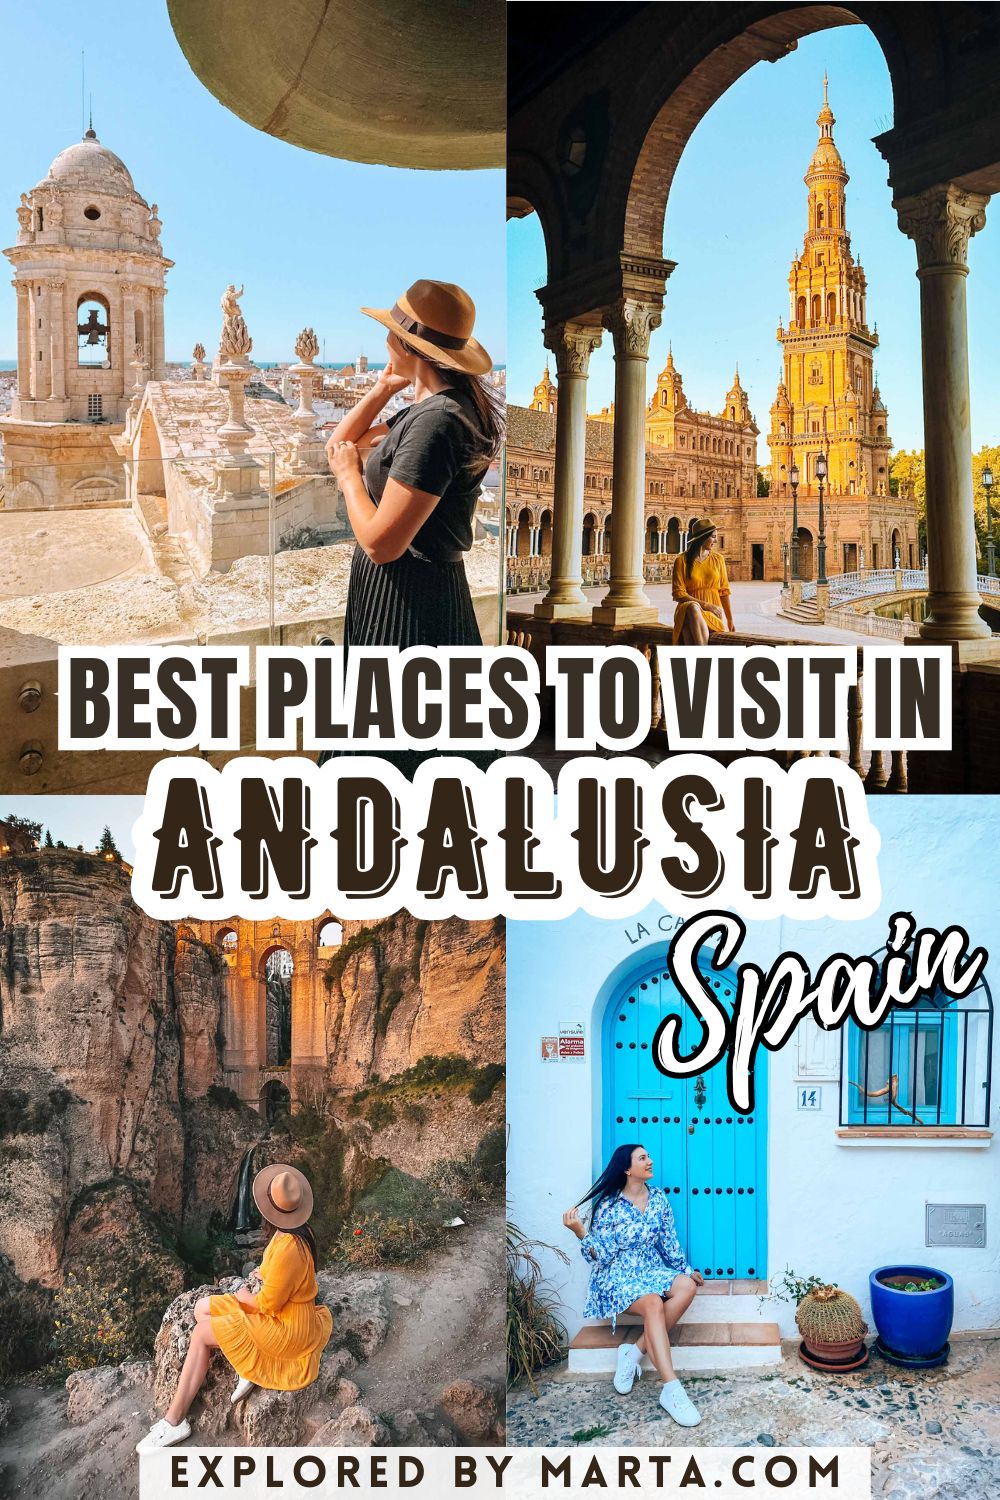 All the best places to visit in Andalusia, Spain